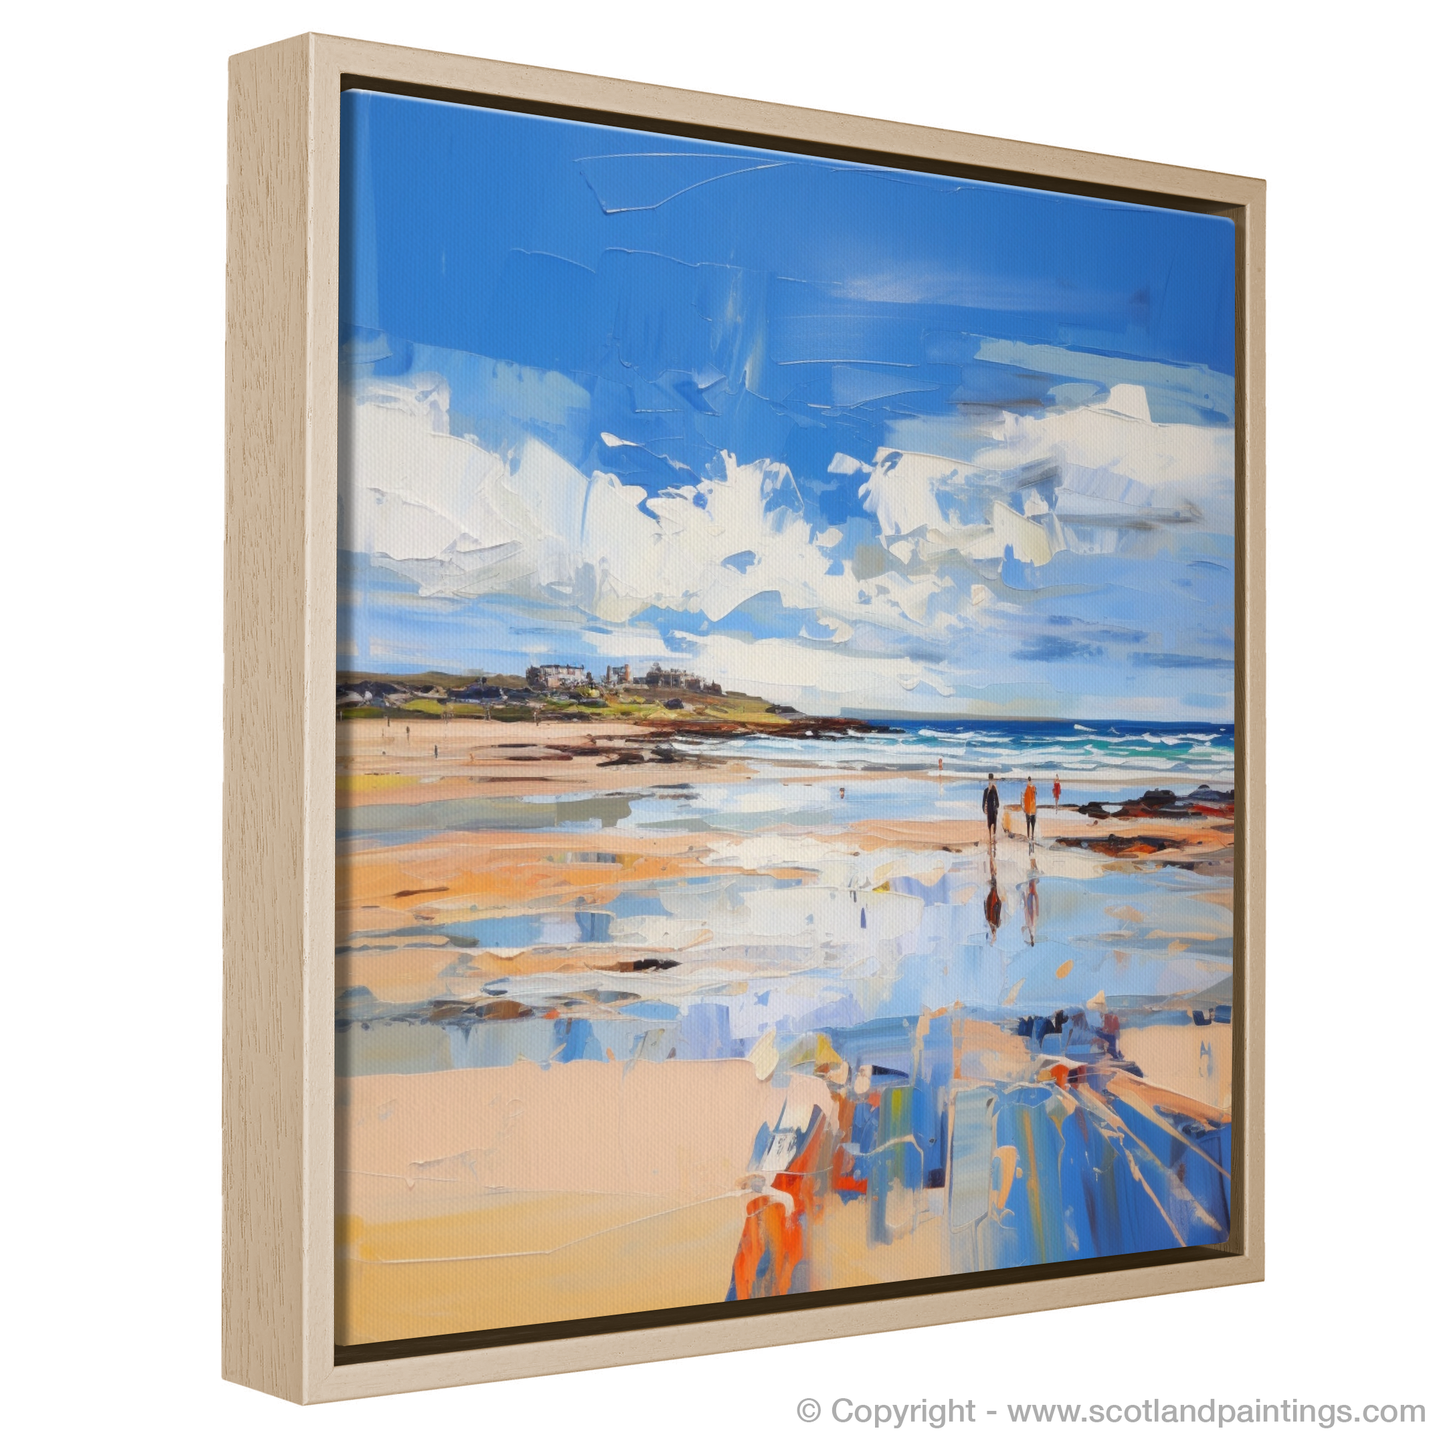 Painting and Art Print of West Sands, St Andrews entitled "West Sands Whispers: An Expressionist Ode to Scottish Shores".